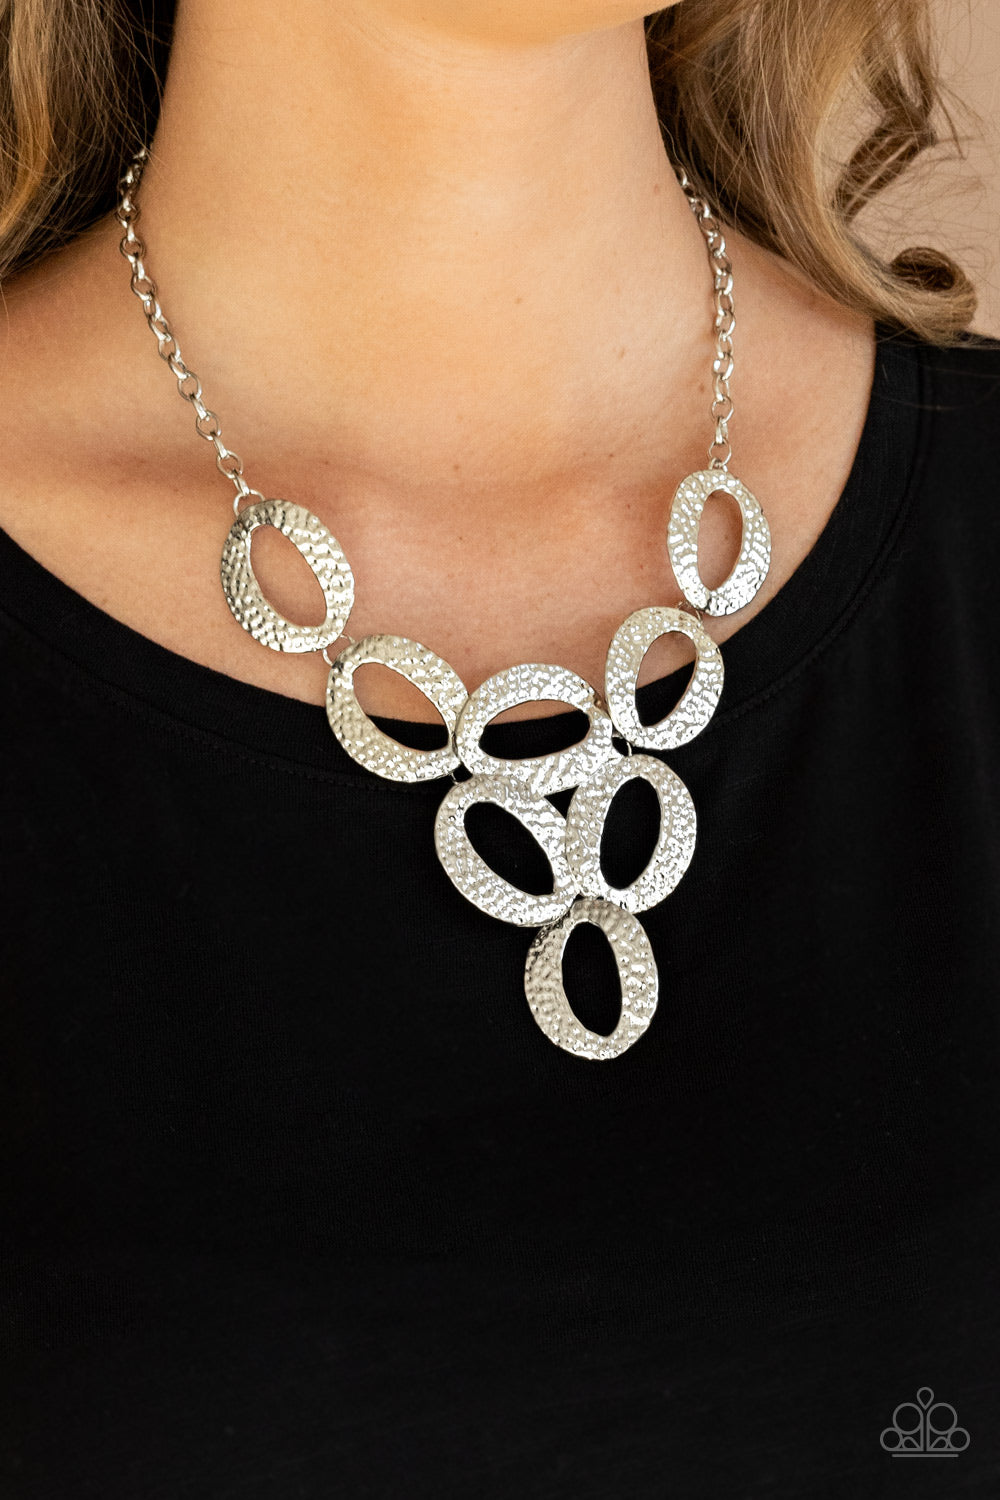 Paparazzi Necklaces - Oval The Limit - Silver